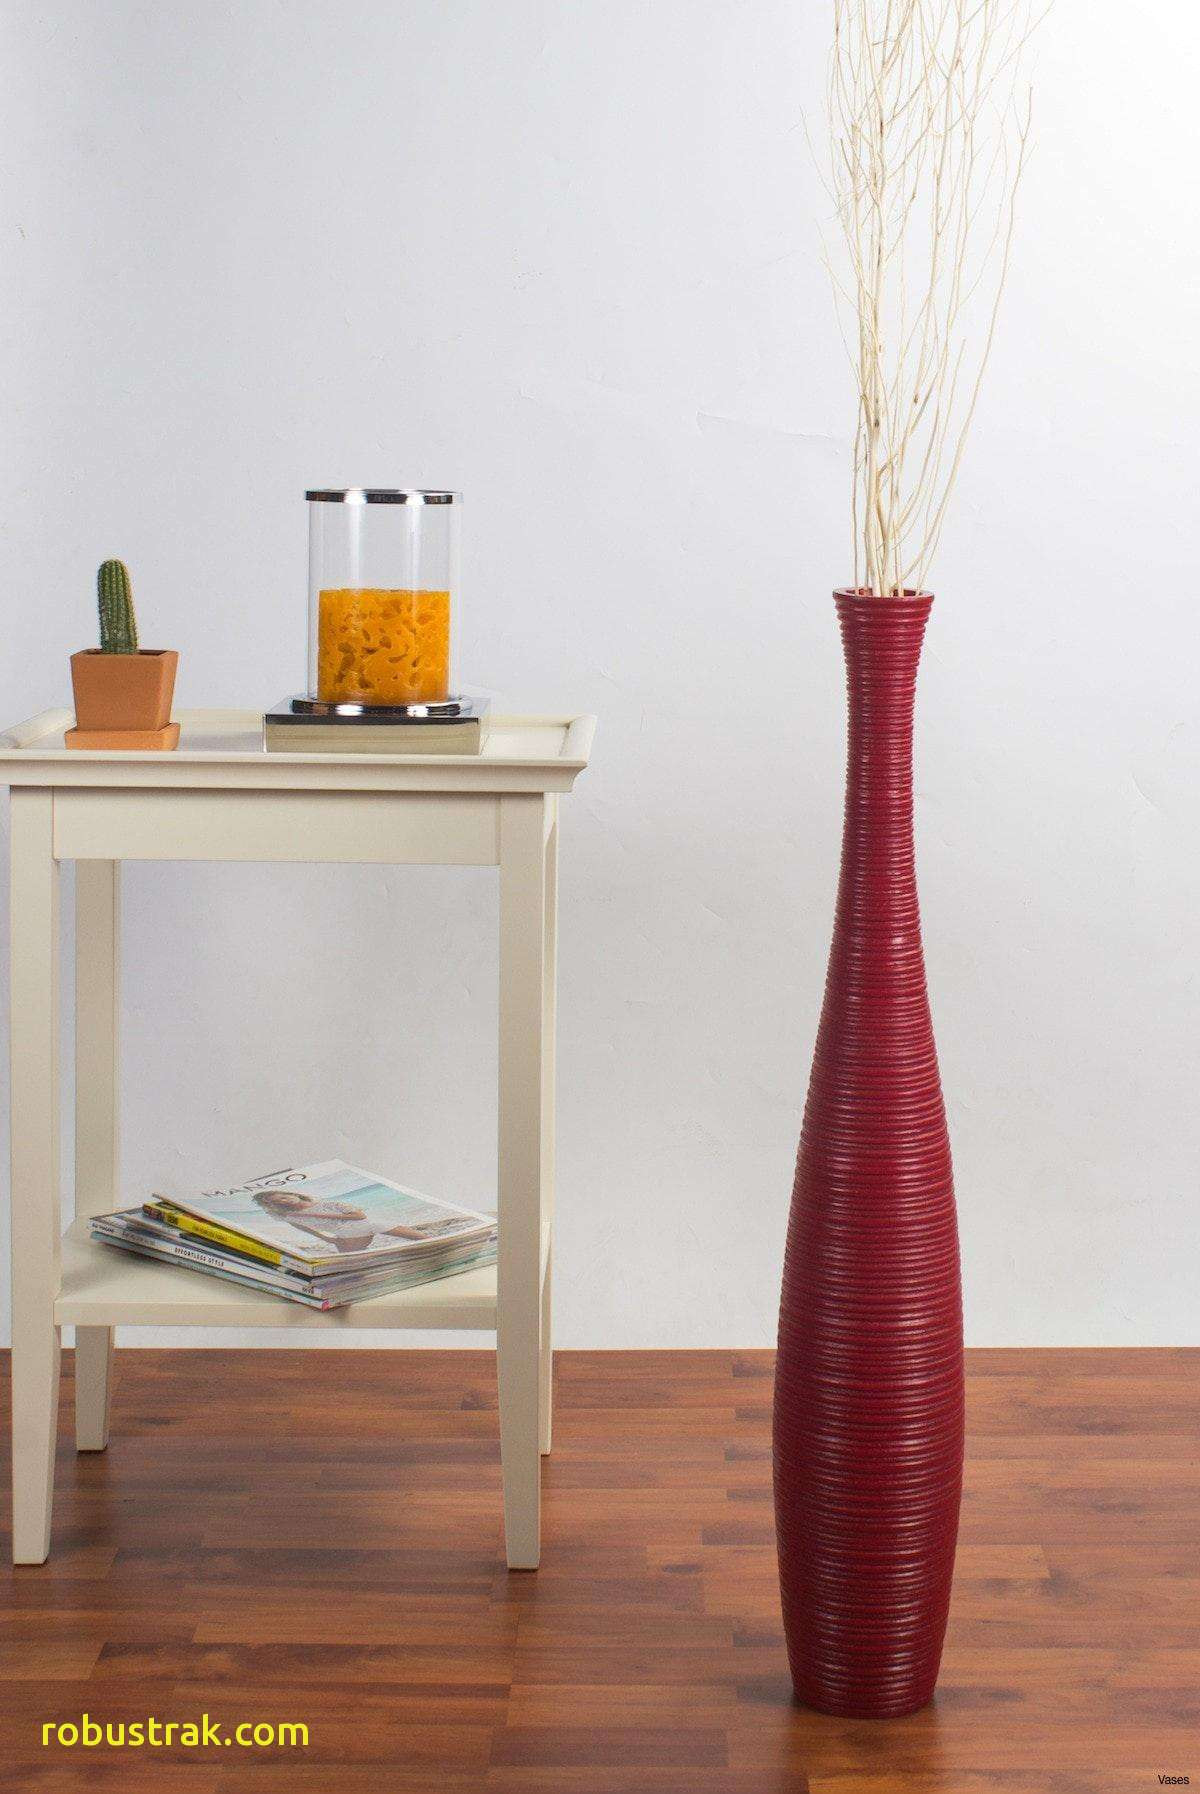 27 Elegant Holiday Vase Filler 2022 free download holiday vase filler of elegant decorating with vases home design ideas regarding how to decorate living room table unique living room red vases luxury tall red vaseh vases